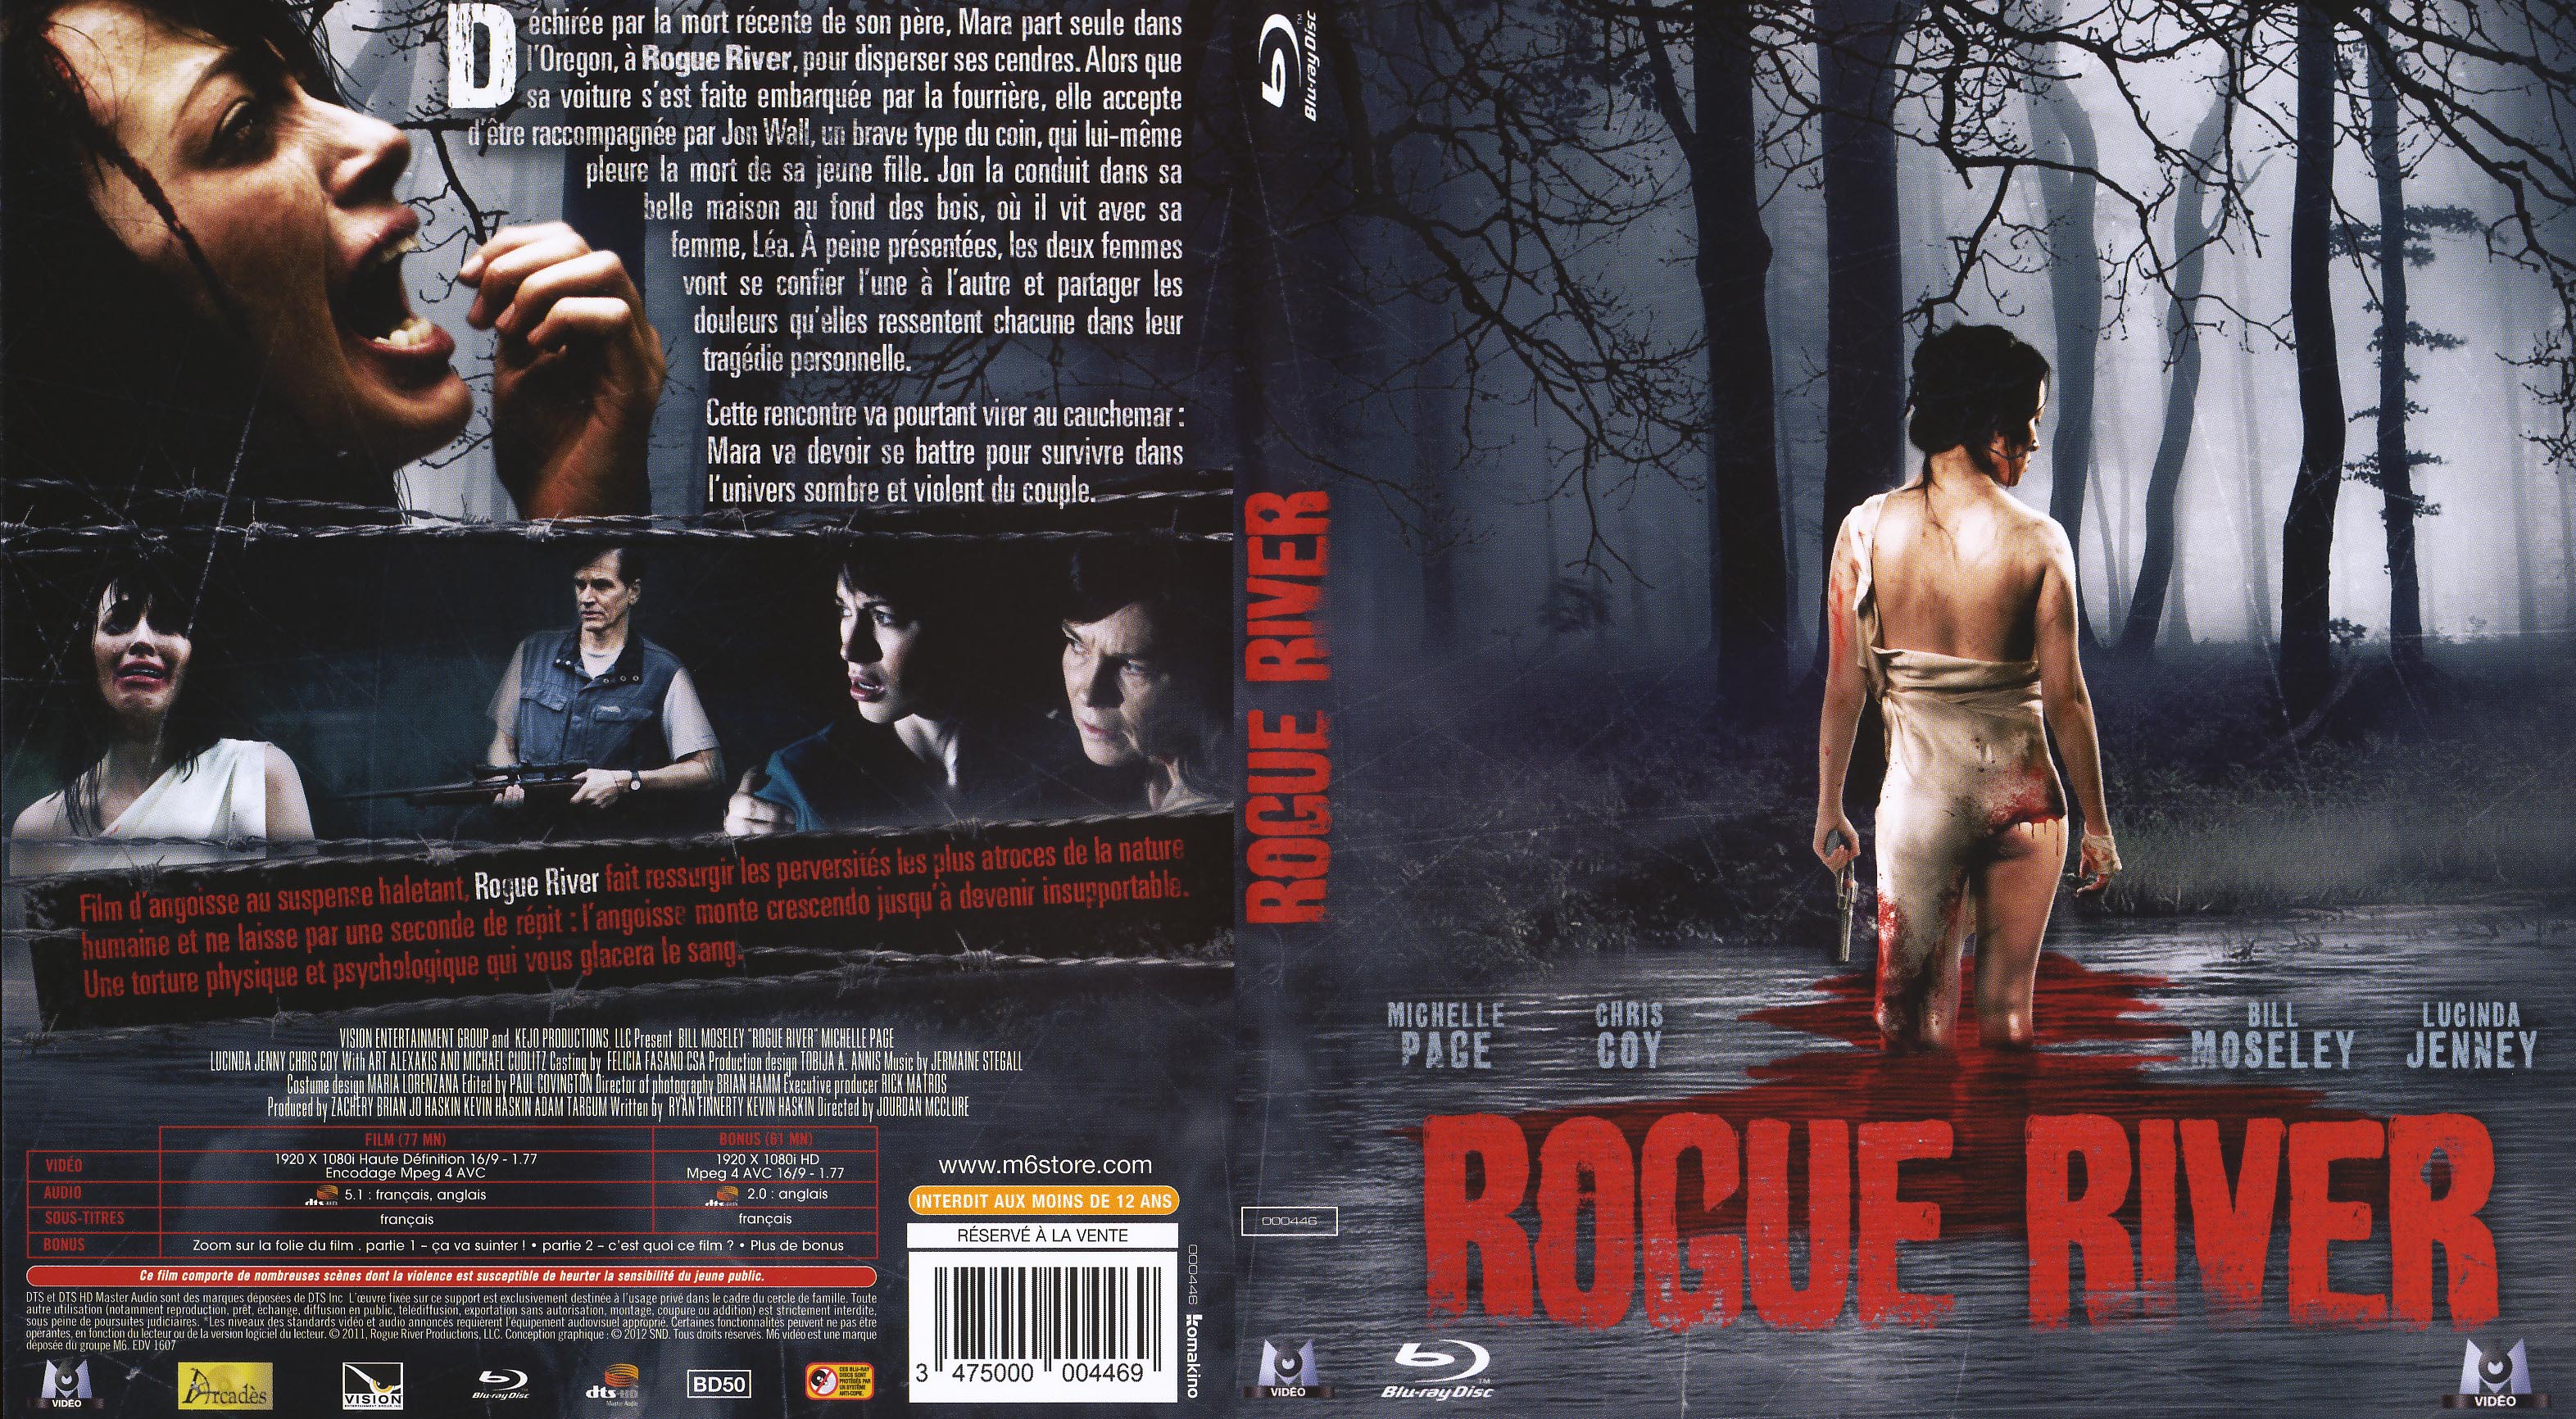 Jaquette DVD Rogue river (BLU-RAY)